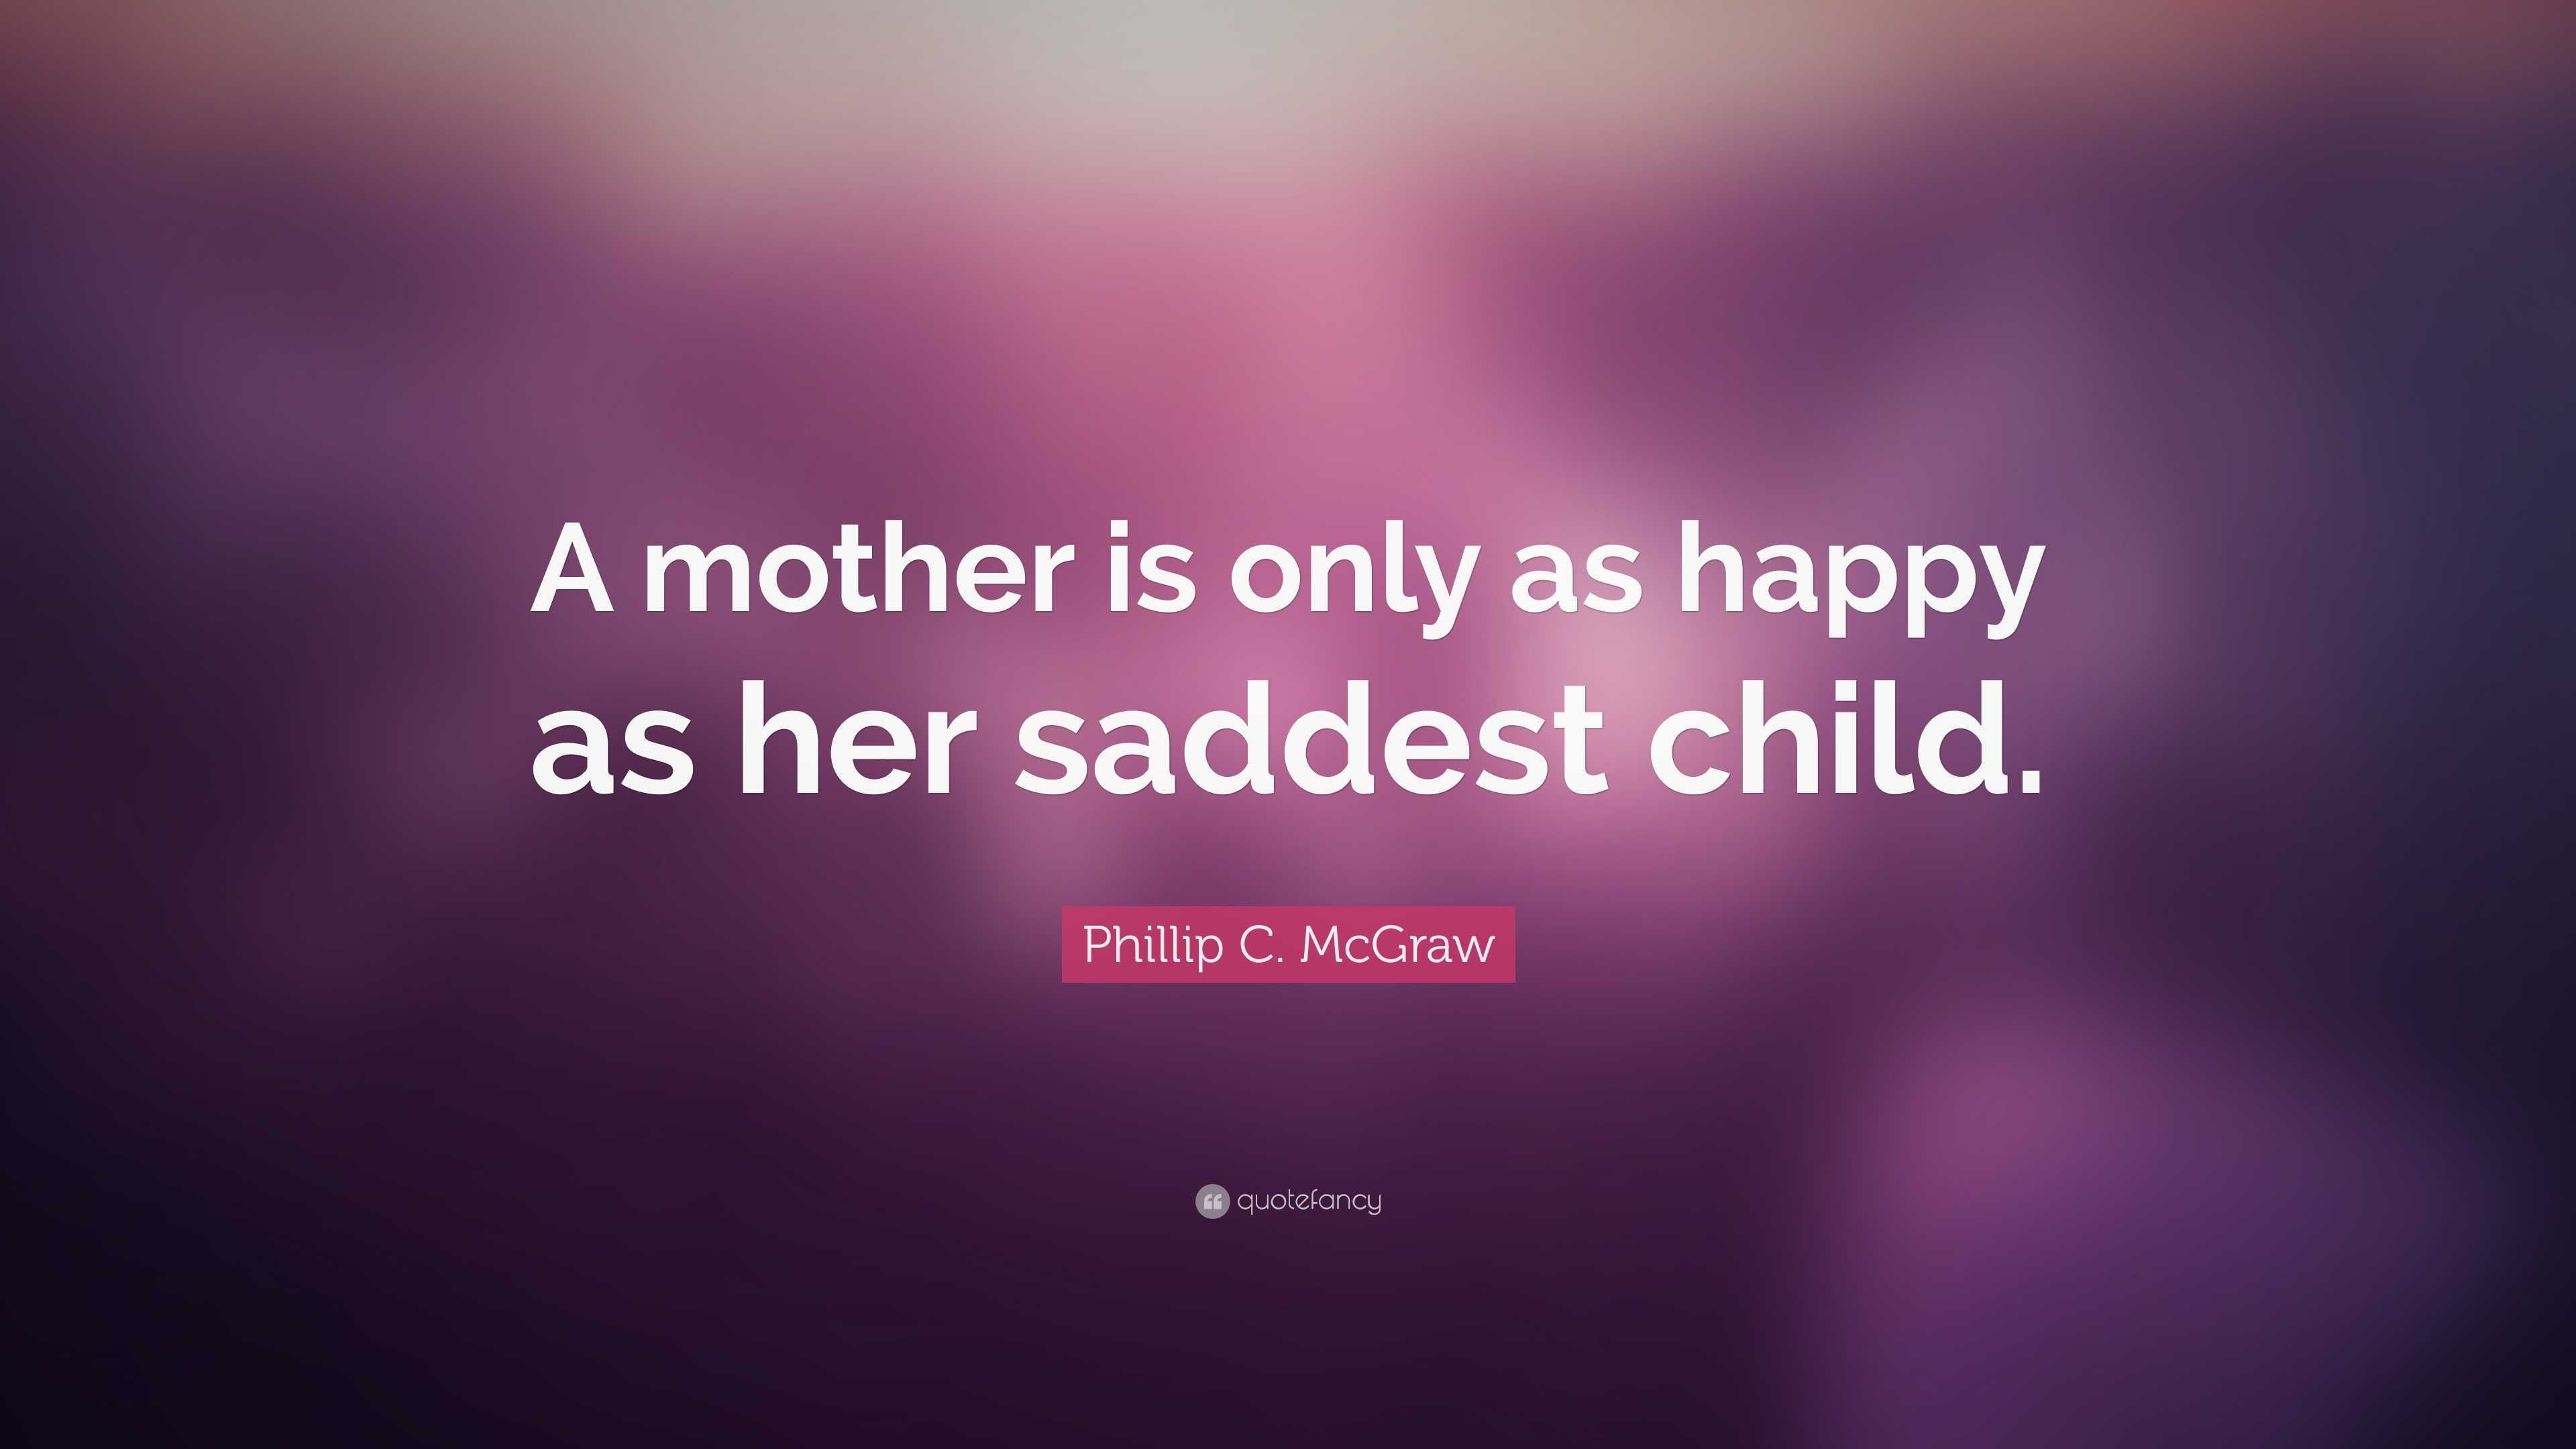 Phillip C. McGraw Quote: “A mother is only as happy as her saddest child.”